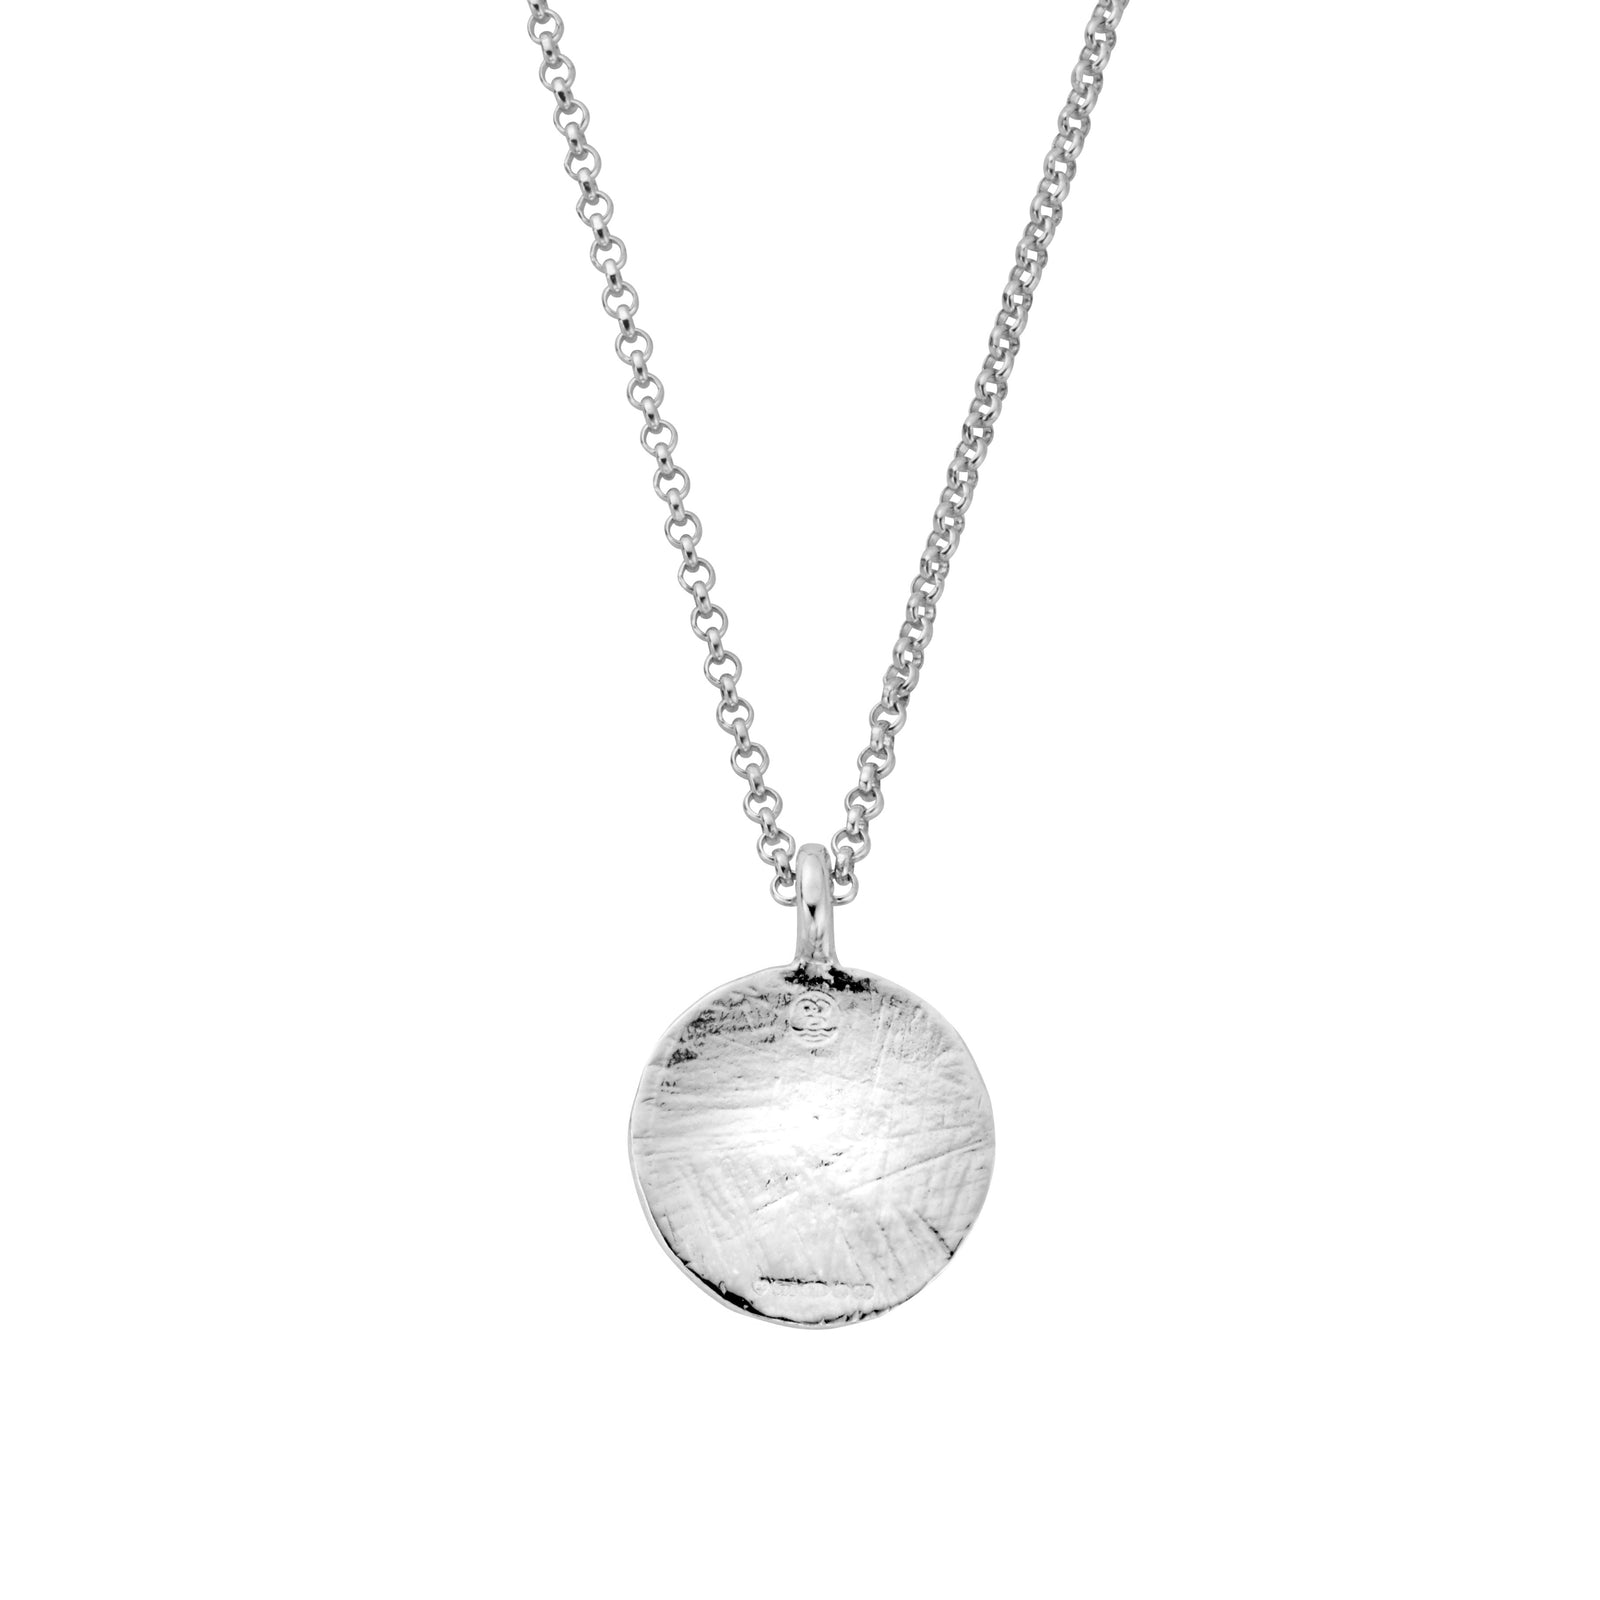 Silver Large Moon Necklace with Paw Print